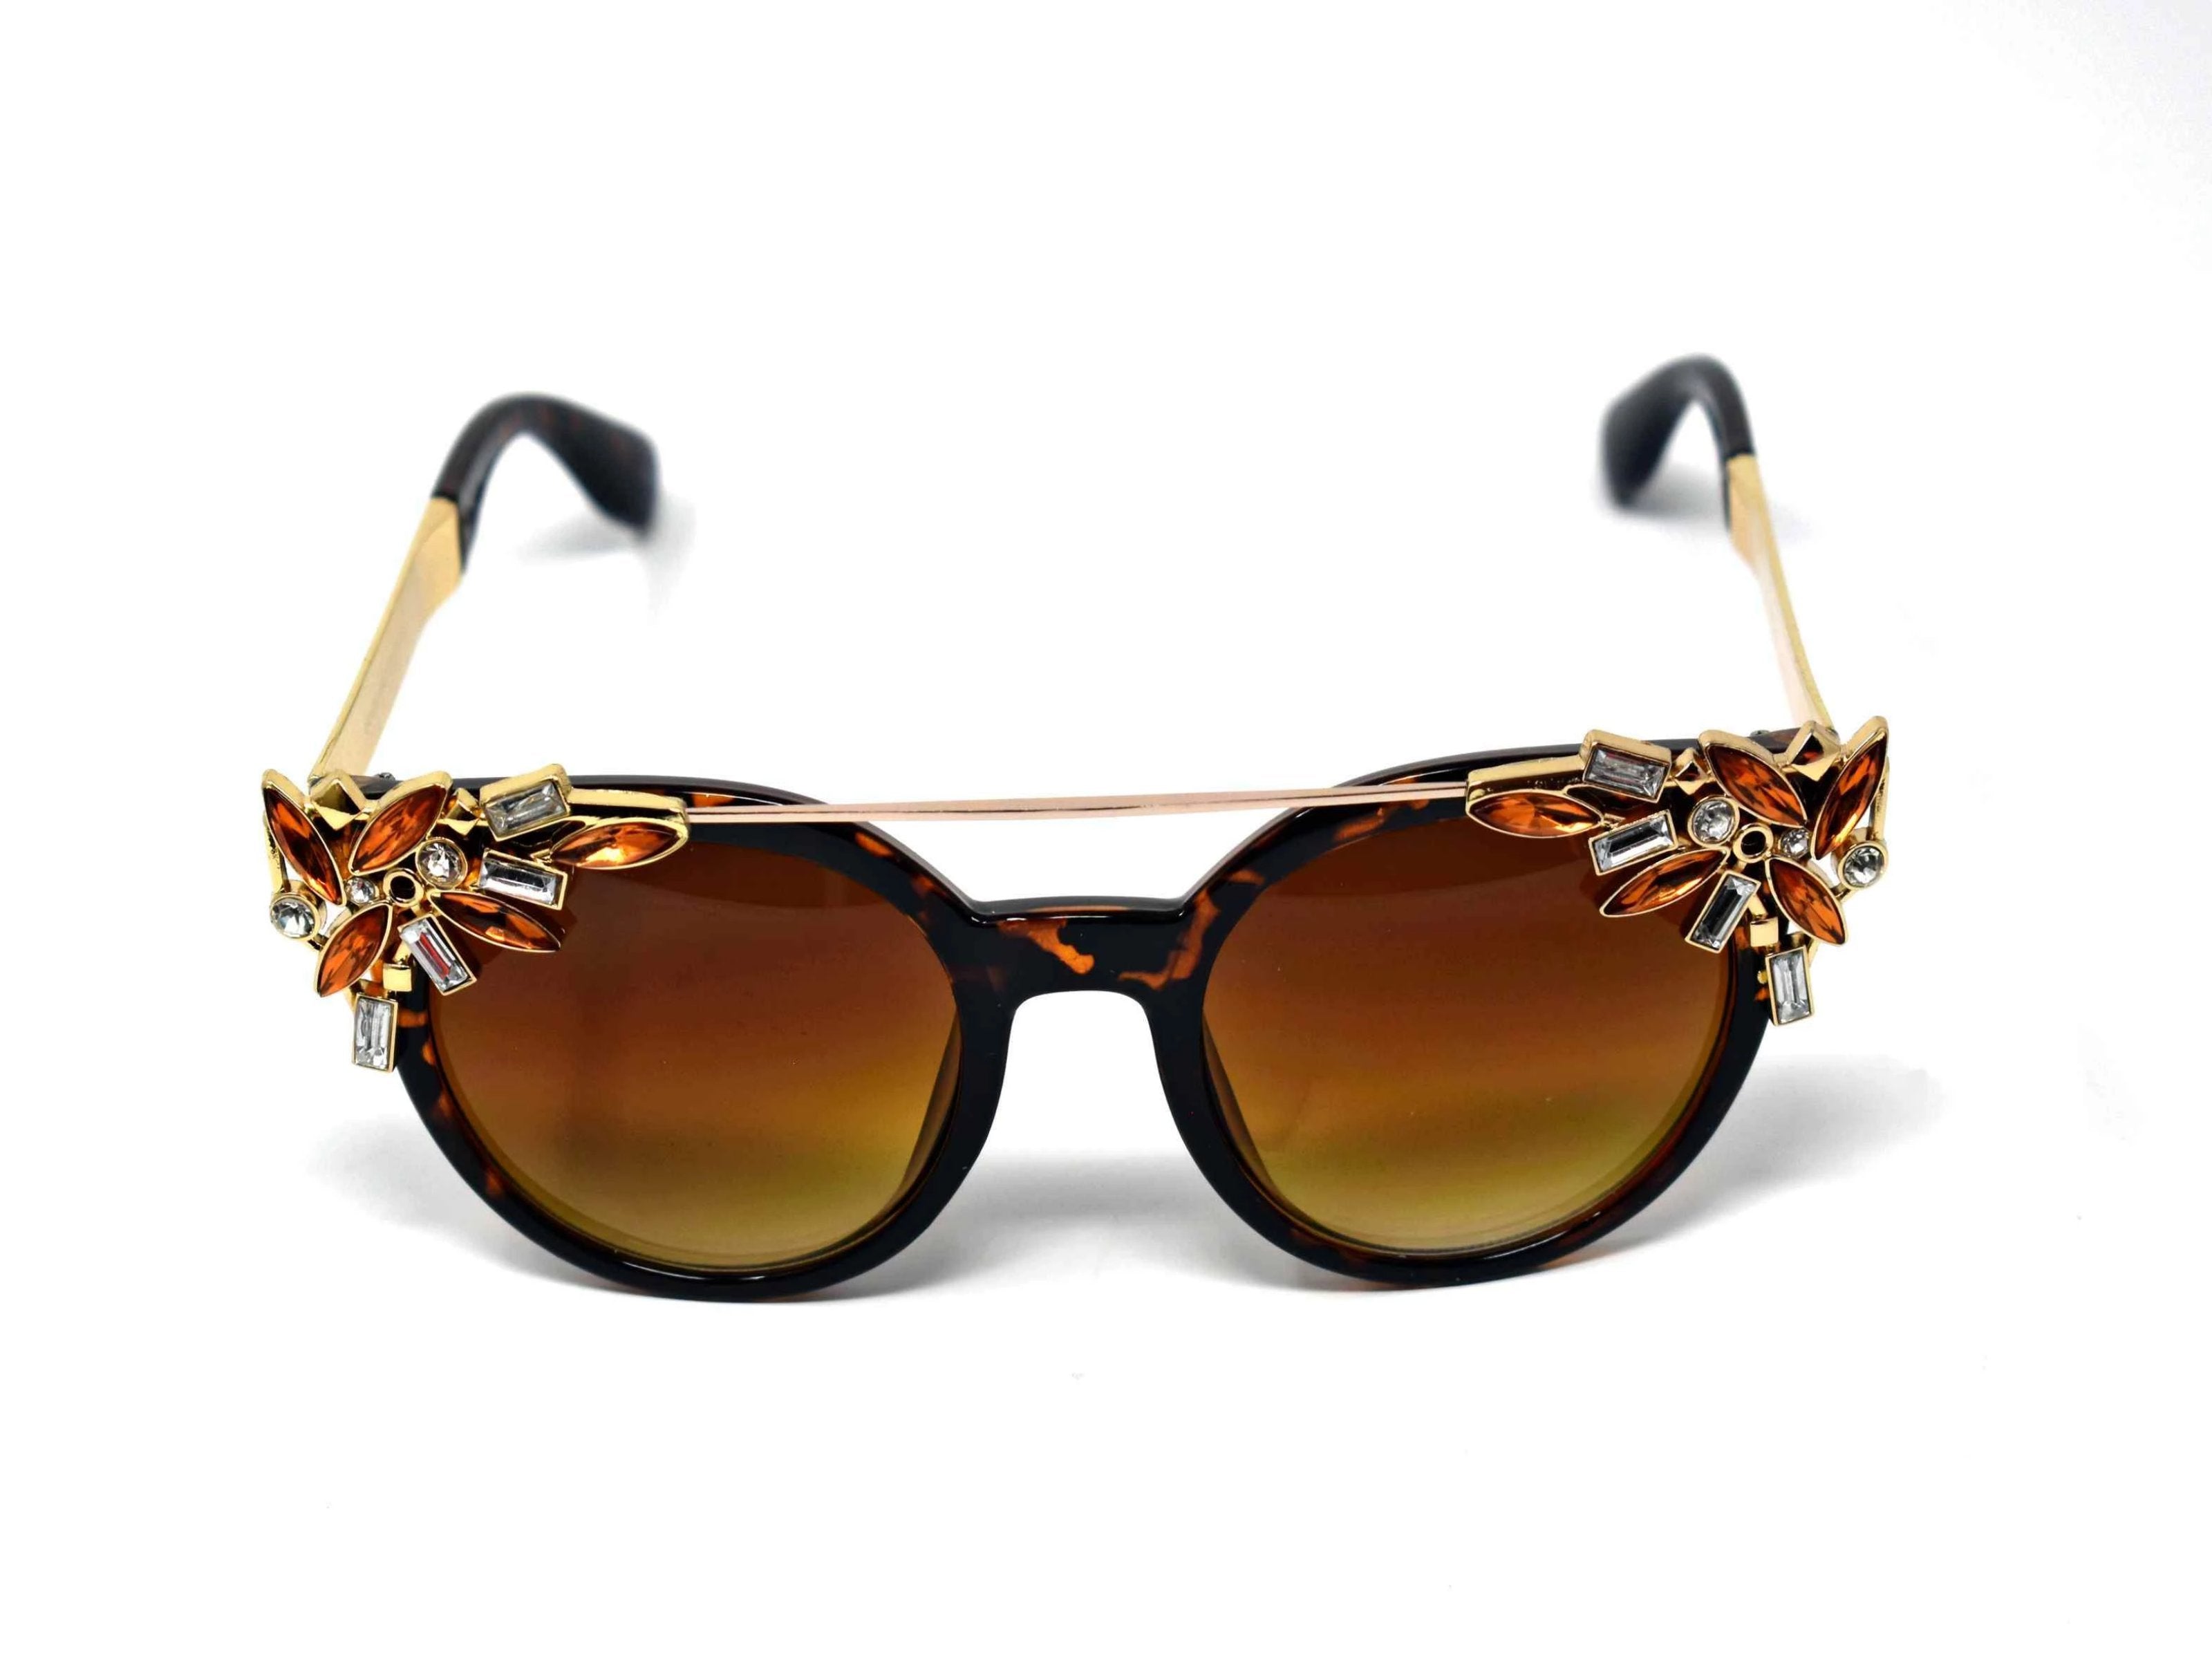 Trend setter and attention getter is what they will call you in these Pansy Leopard sunglasses with a sleek gold trim adorned in clear and brown gems, in a pantos style frame.